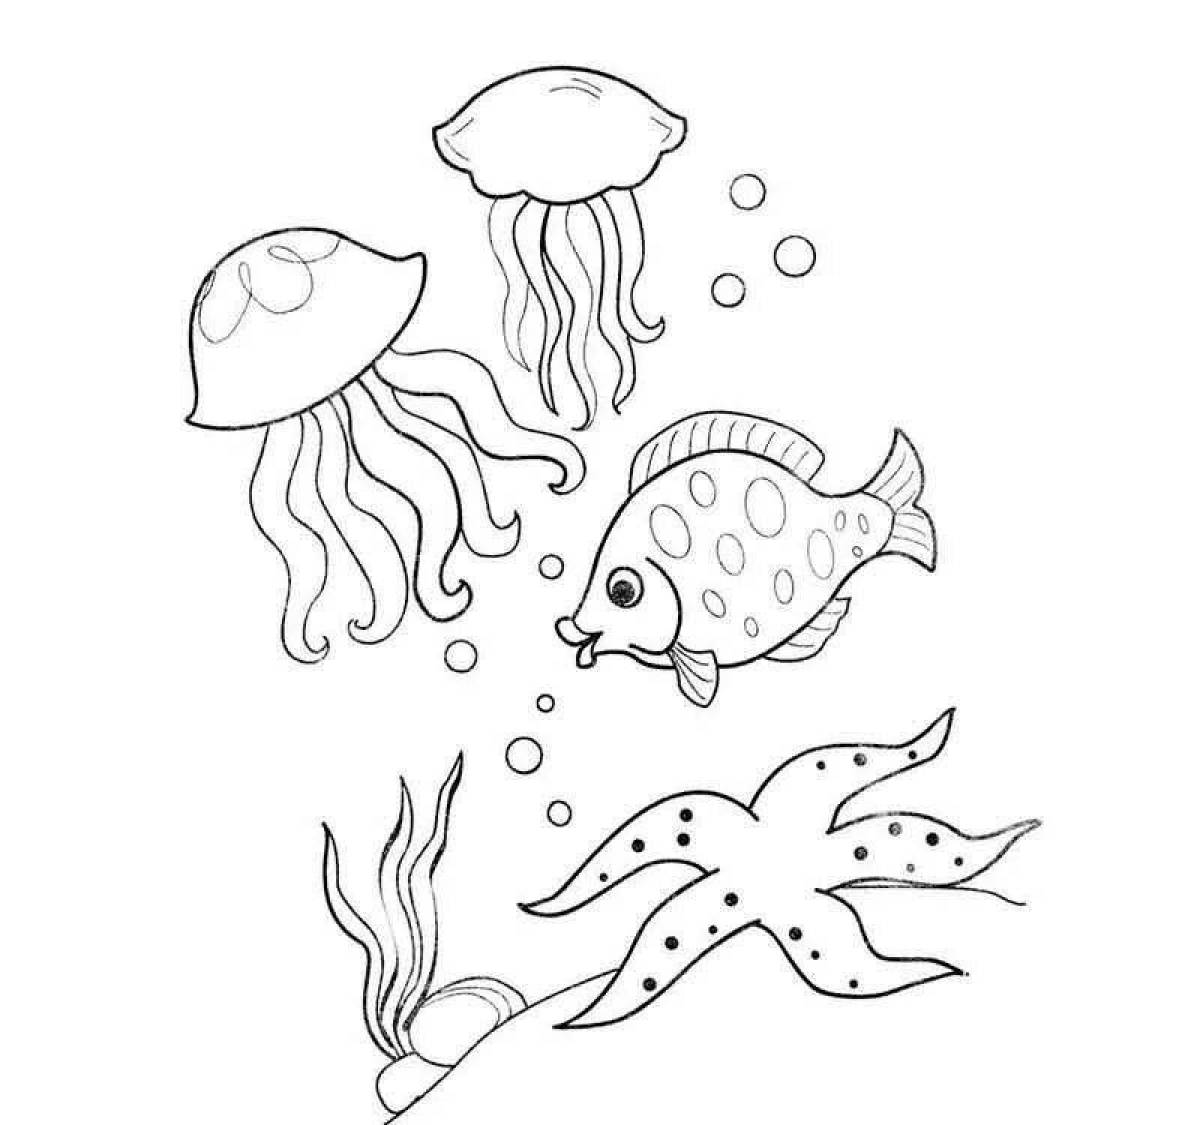 Dazzling Marine Life Coloring Page for 6-7 year olds